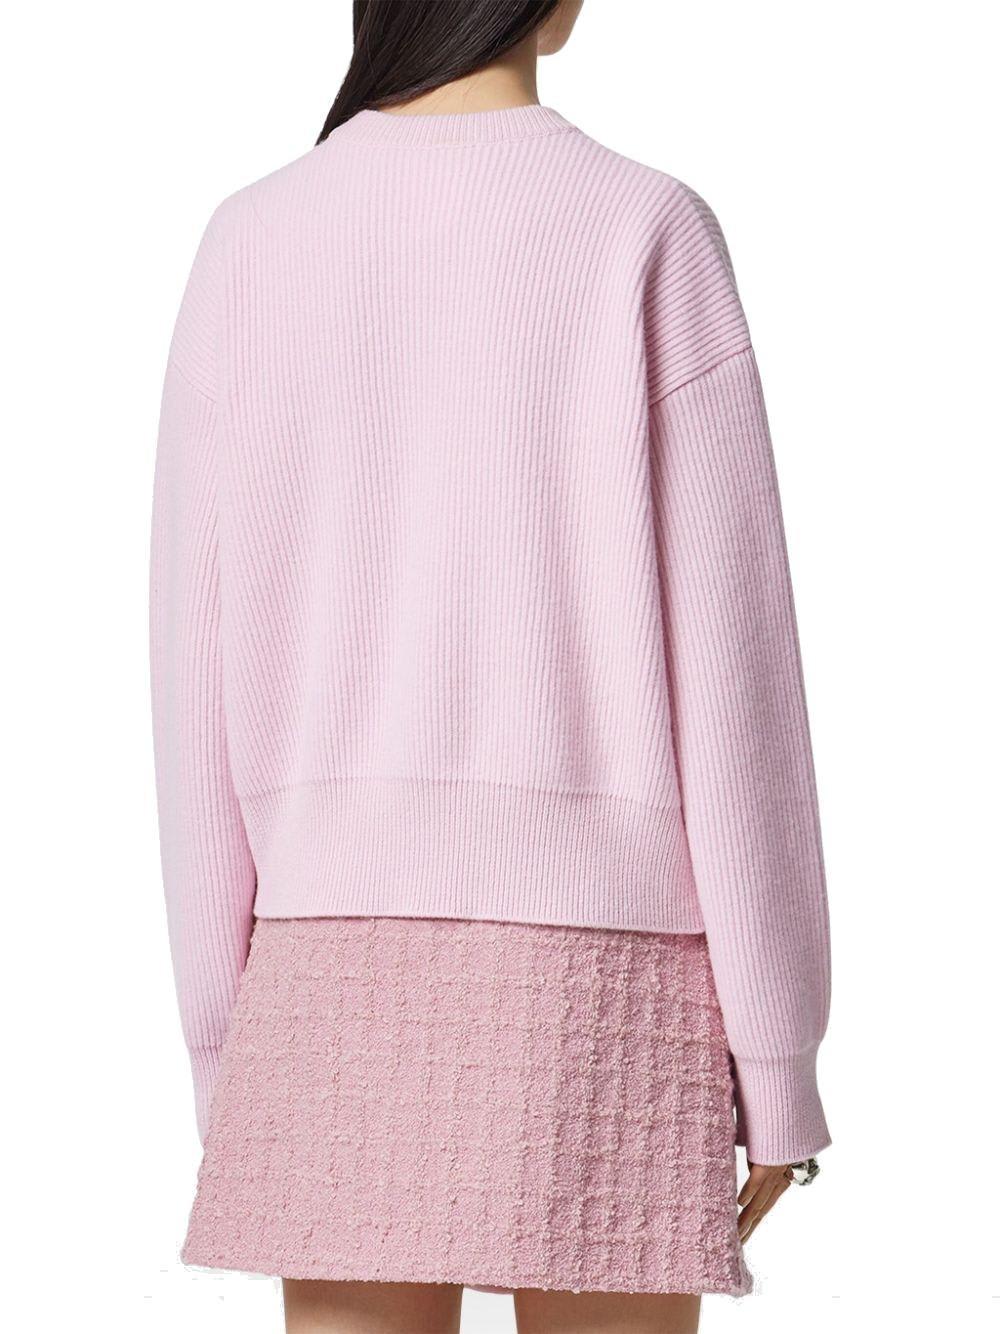 Shop Versace Logo Embroidered Knitted Jumper In Pale Pink